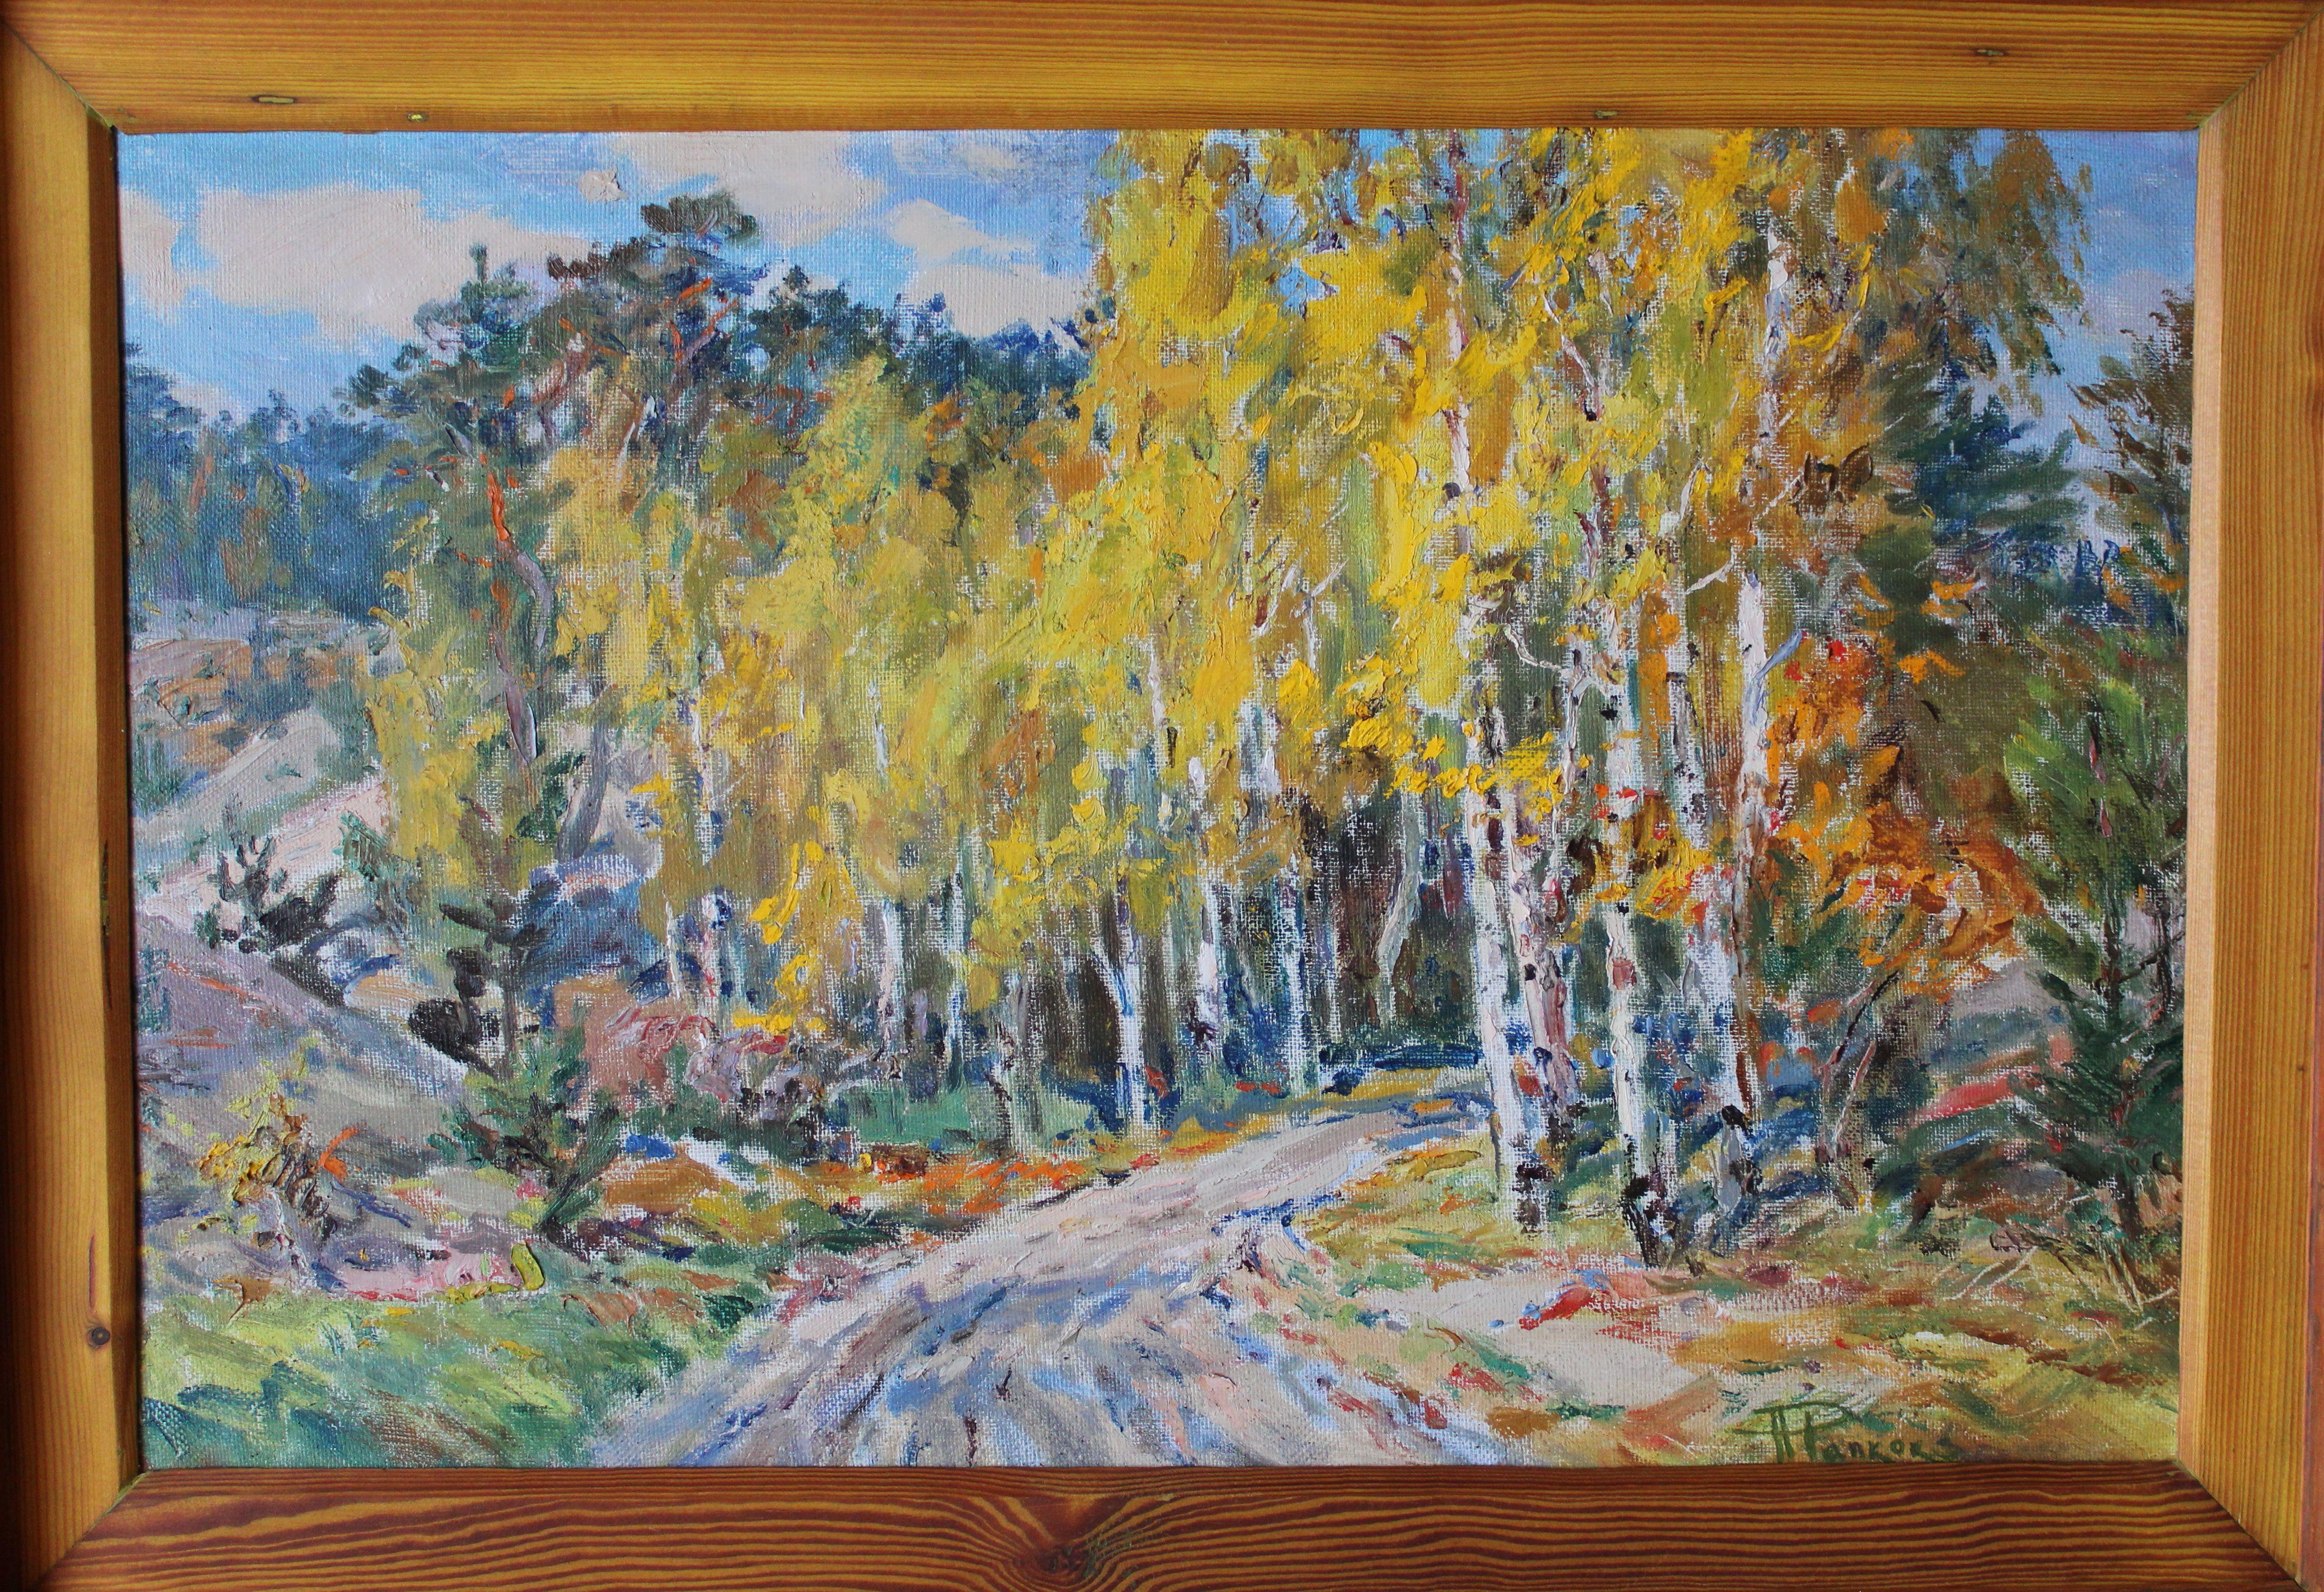 Birches. Oil on canvas. 46, 5x70, 5 cm. - Painting by Arnolds Pankoks